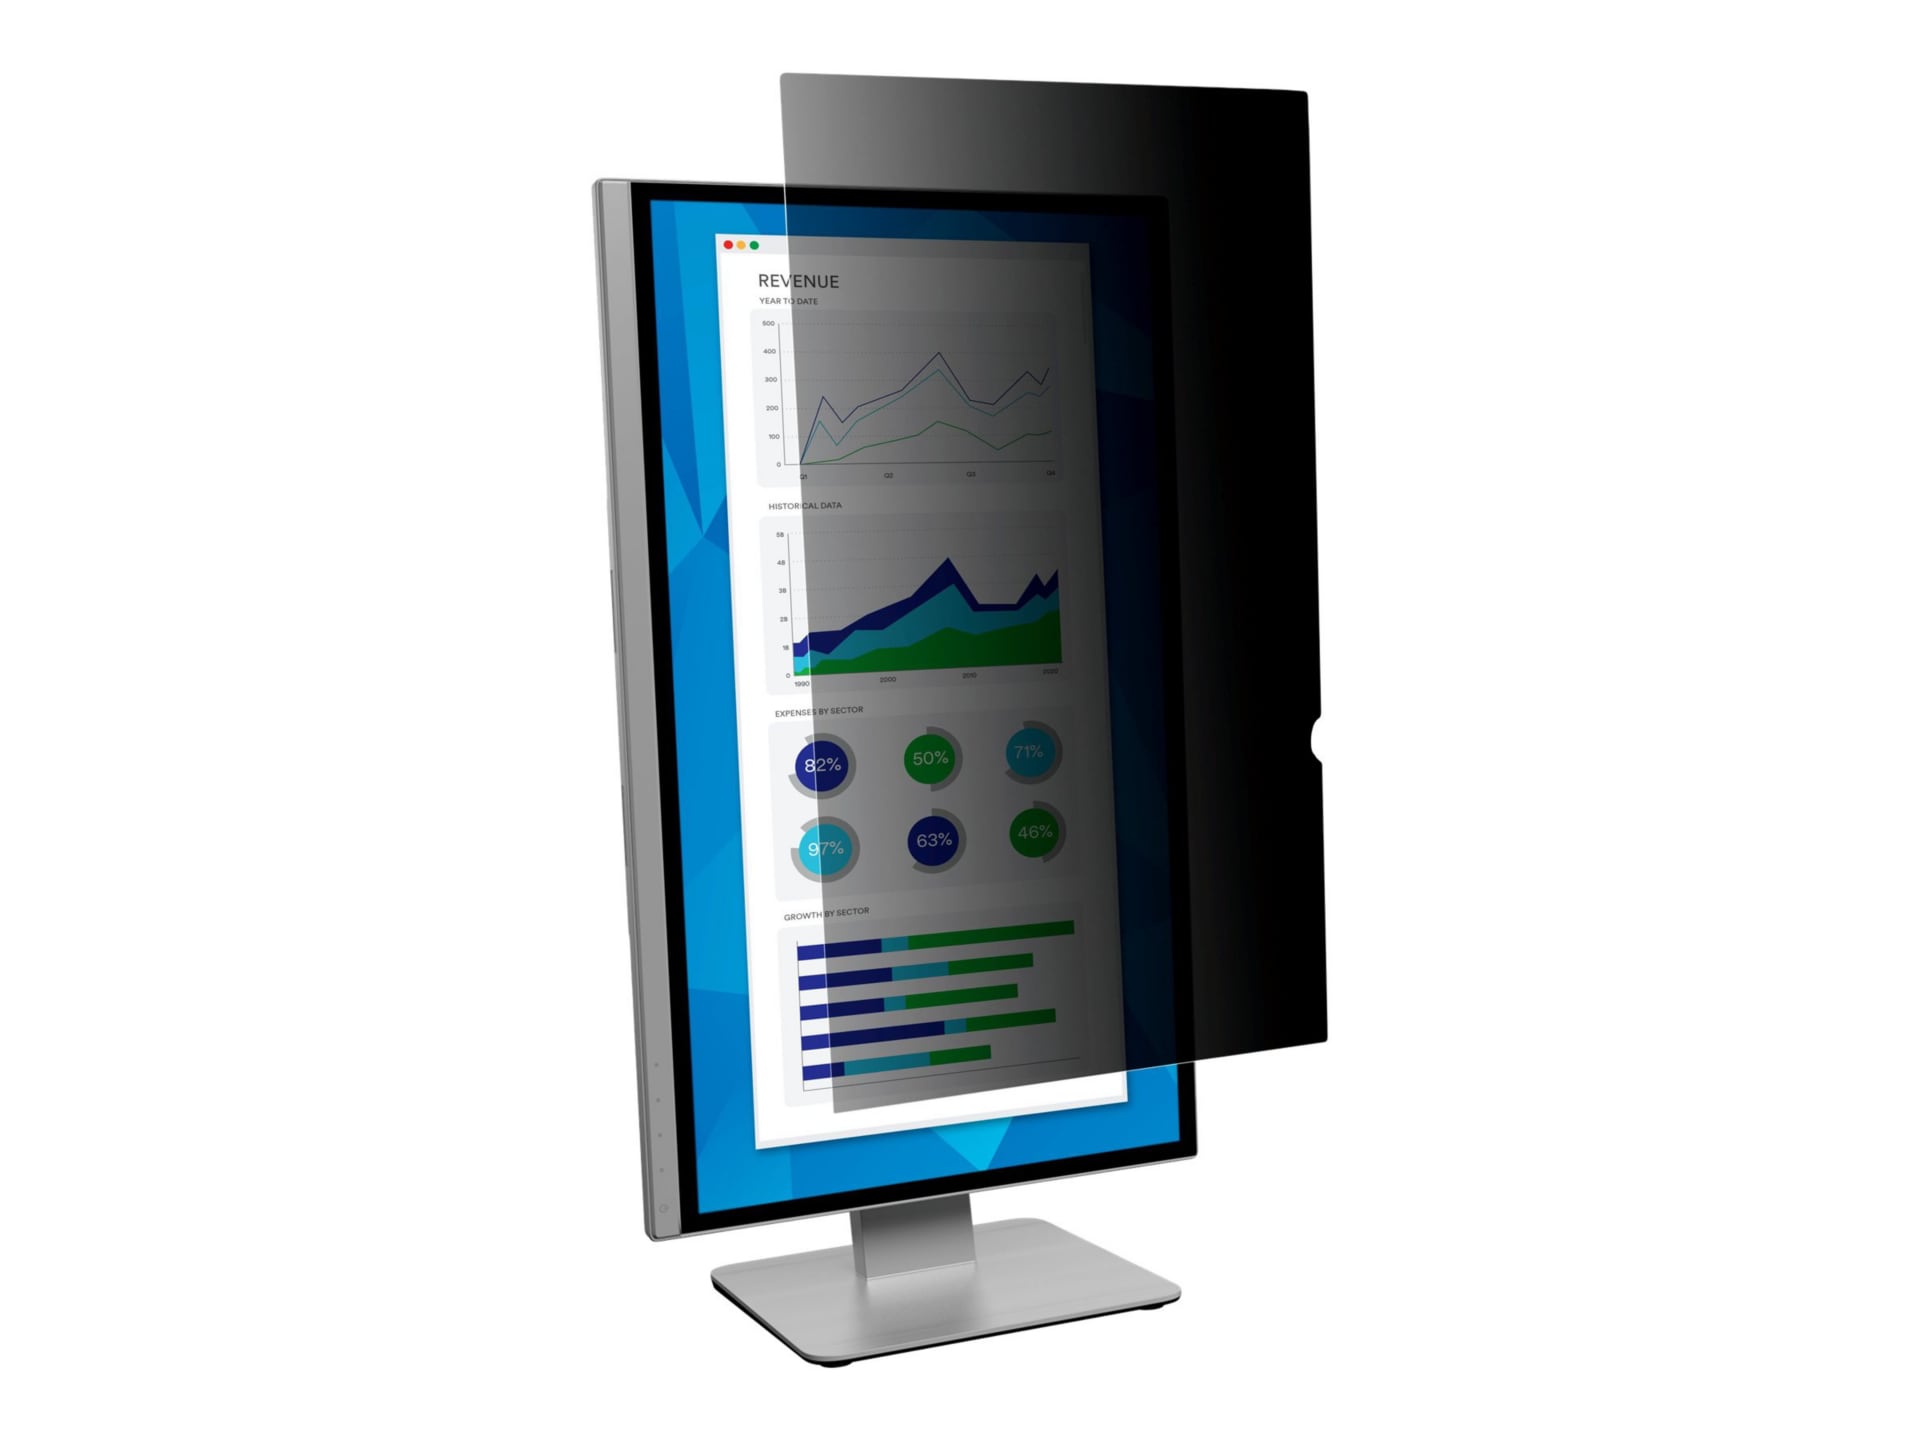 3M Privacy Filter for 25" Monitors 16:9 - display privacy filter - 25" wide